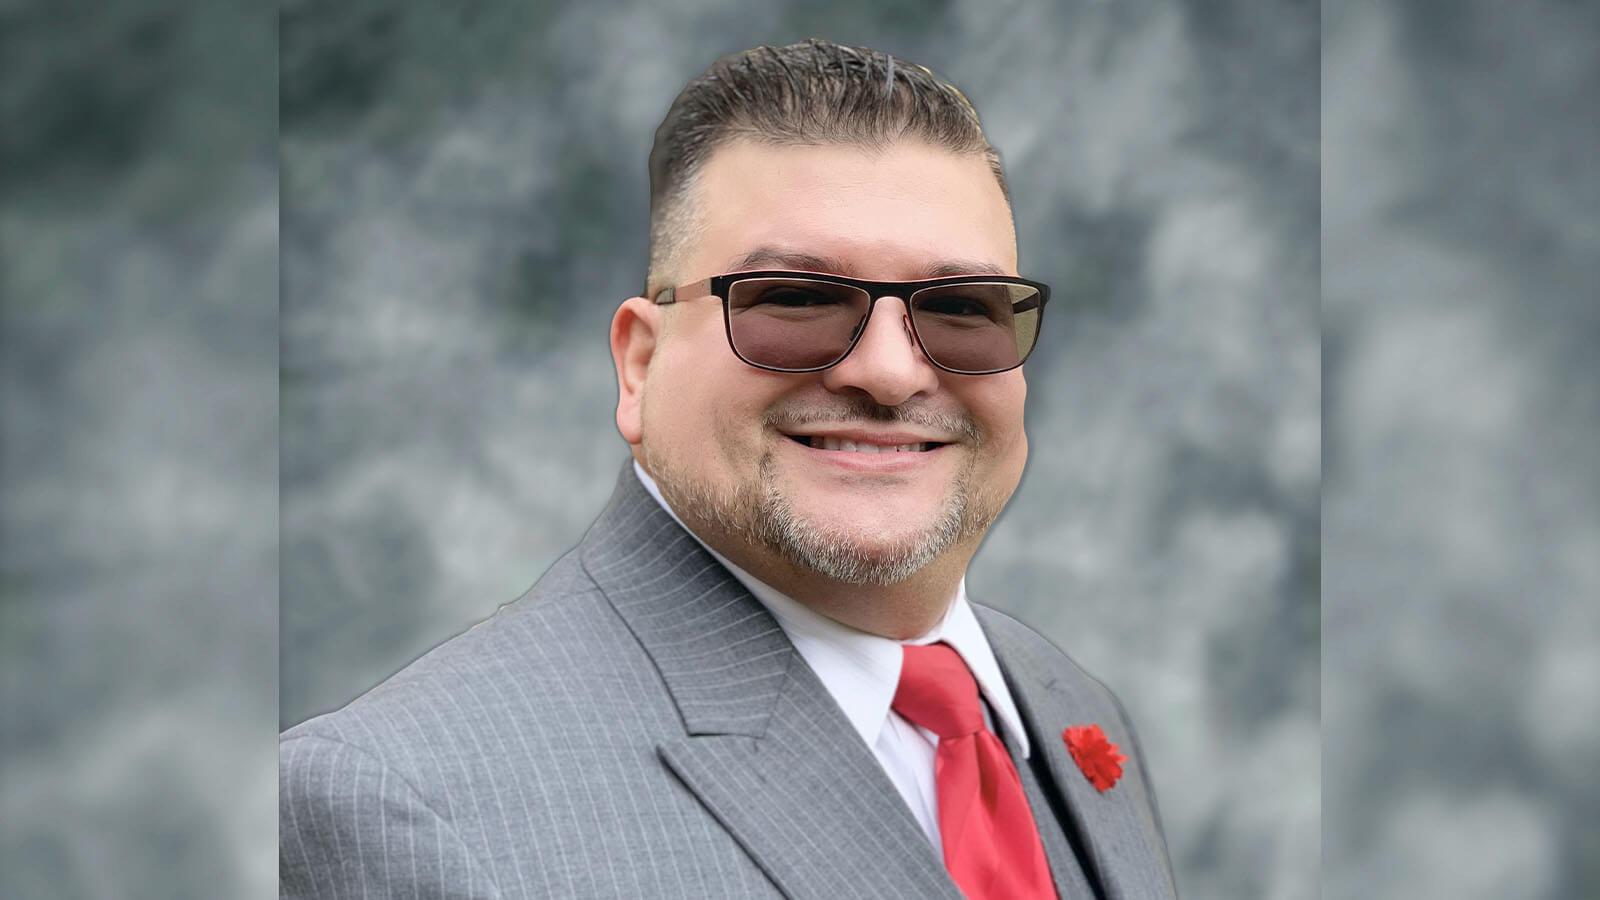 Will Torres wears a gray pinstriped suit with a red tie, a red carnation on the lapel, and sunglasses.